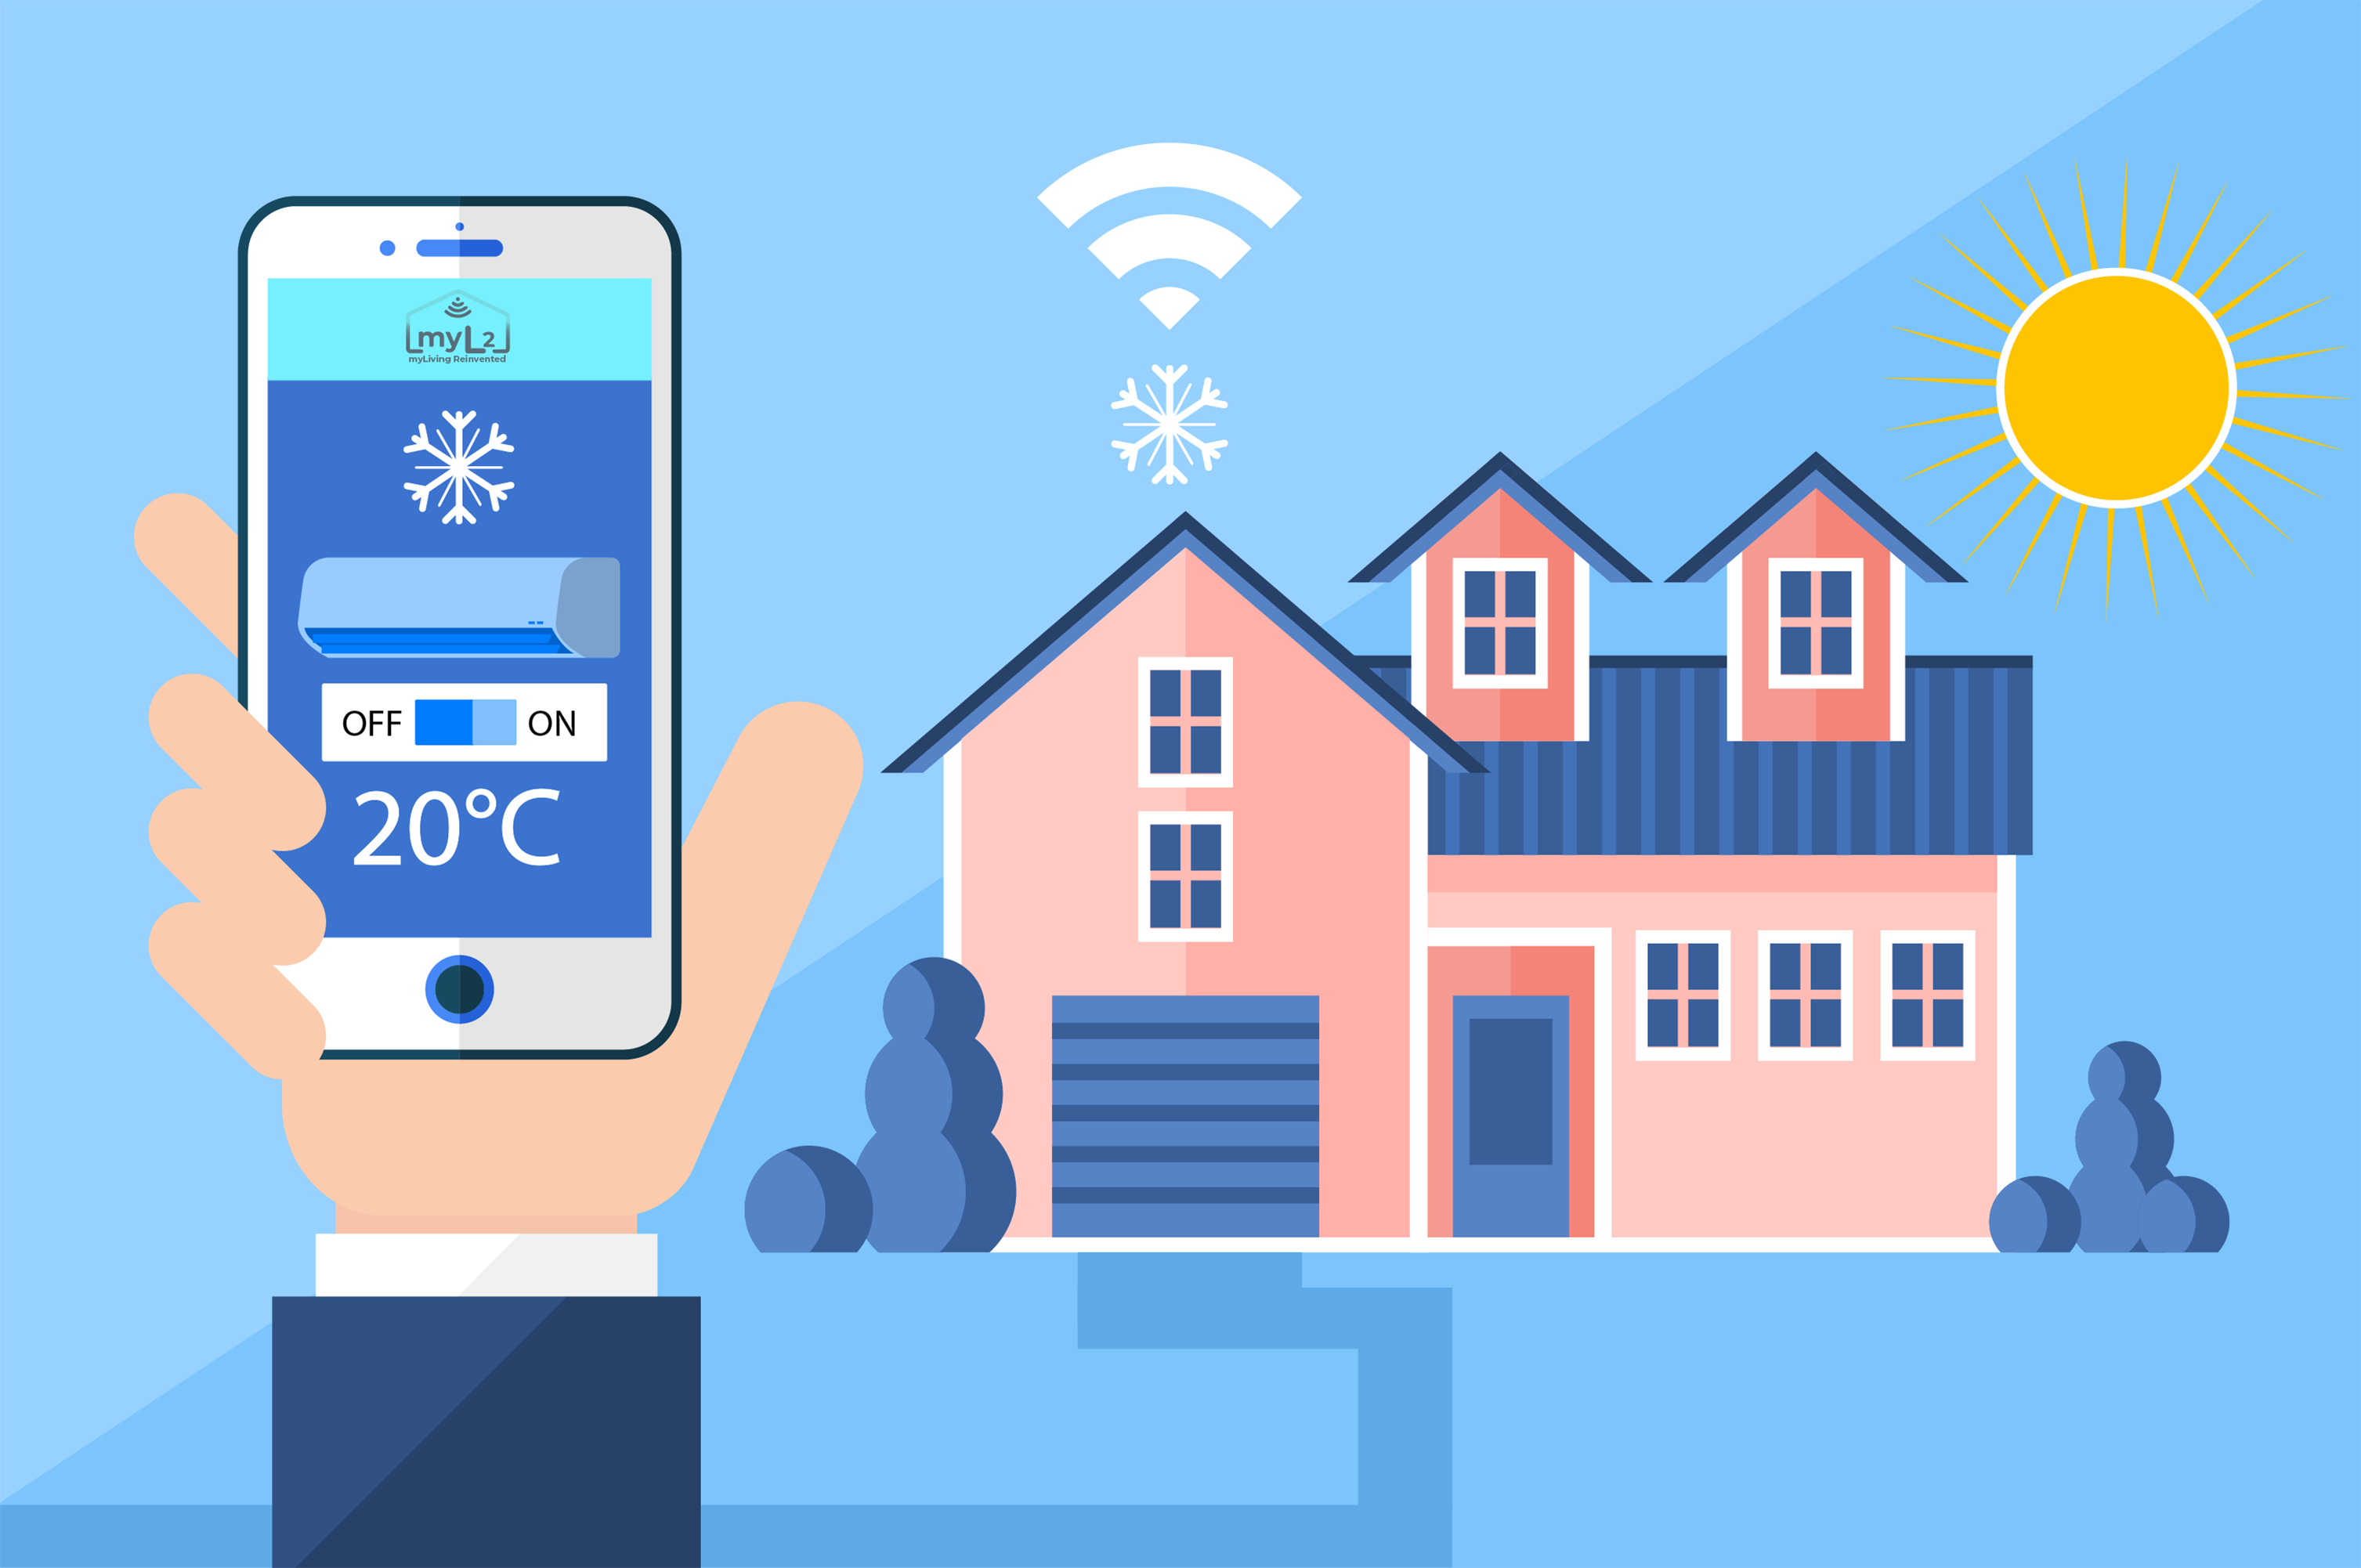 How do we cool the smart home remotely?